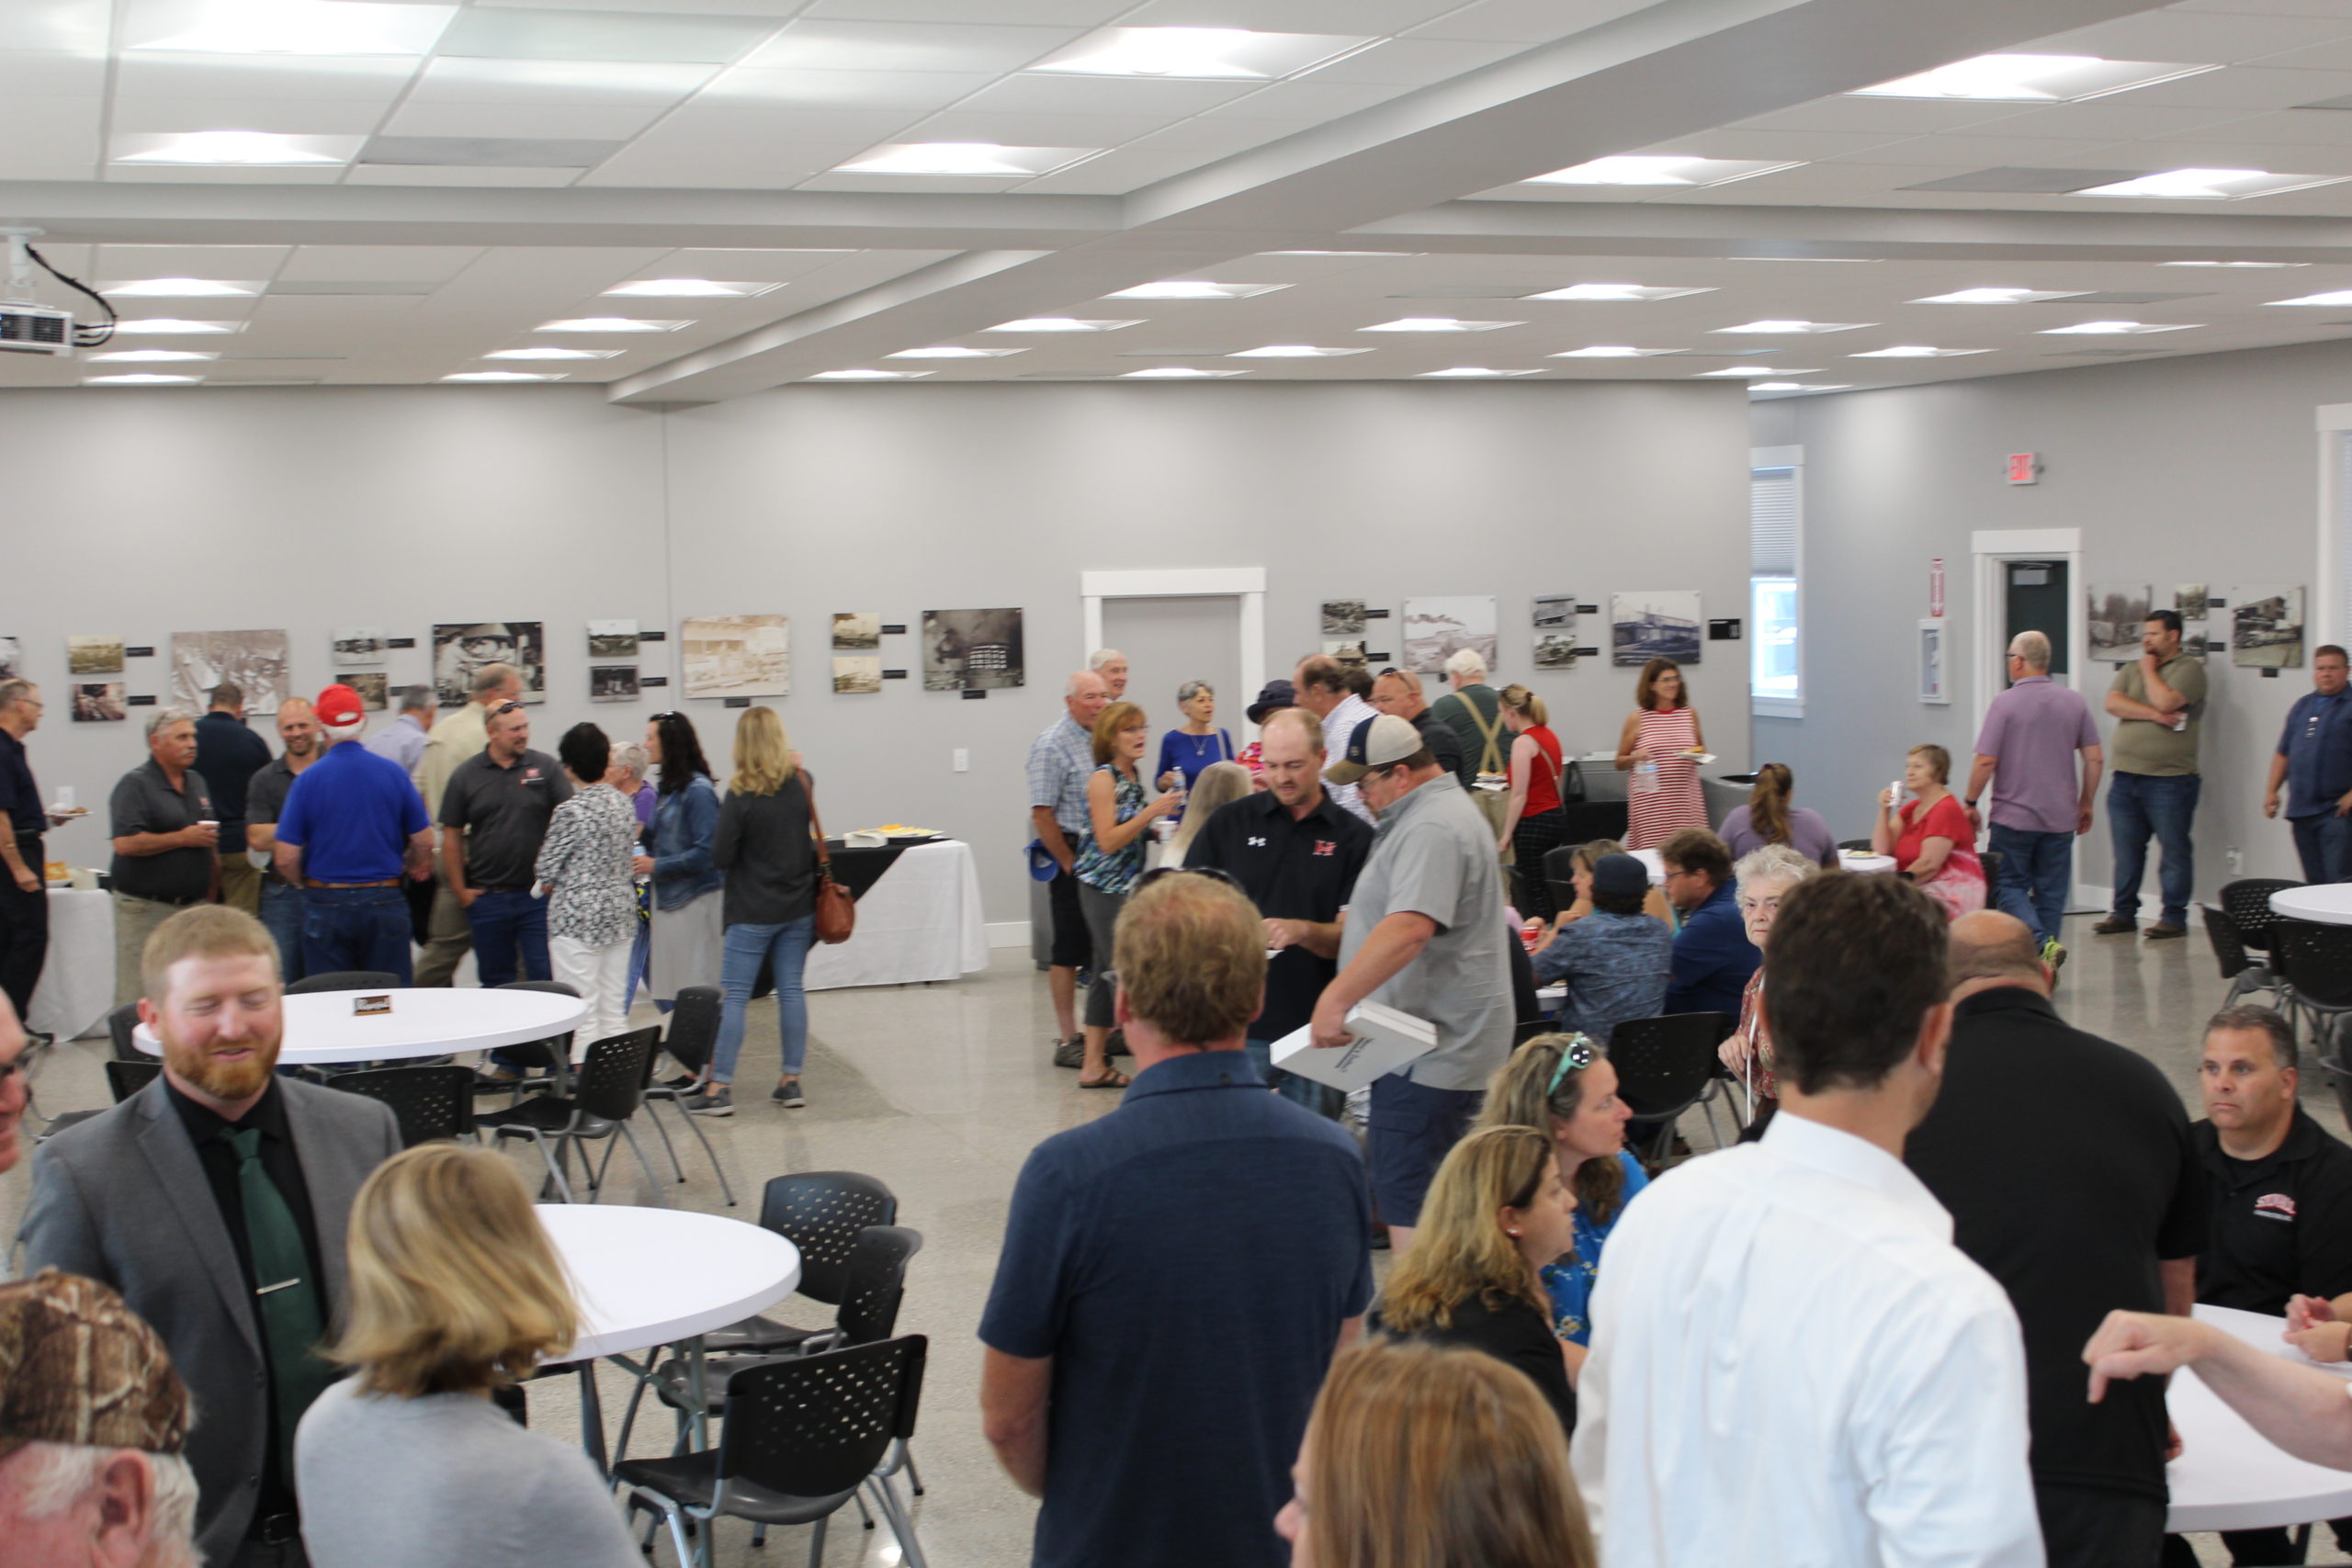 The event space at the research center was full for the Aug. 5 event.